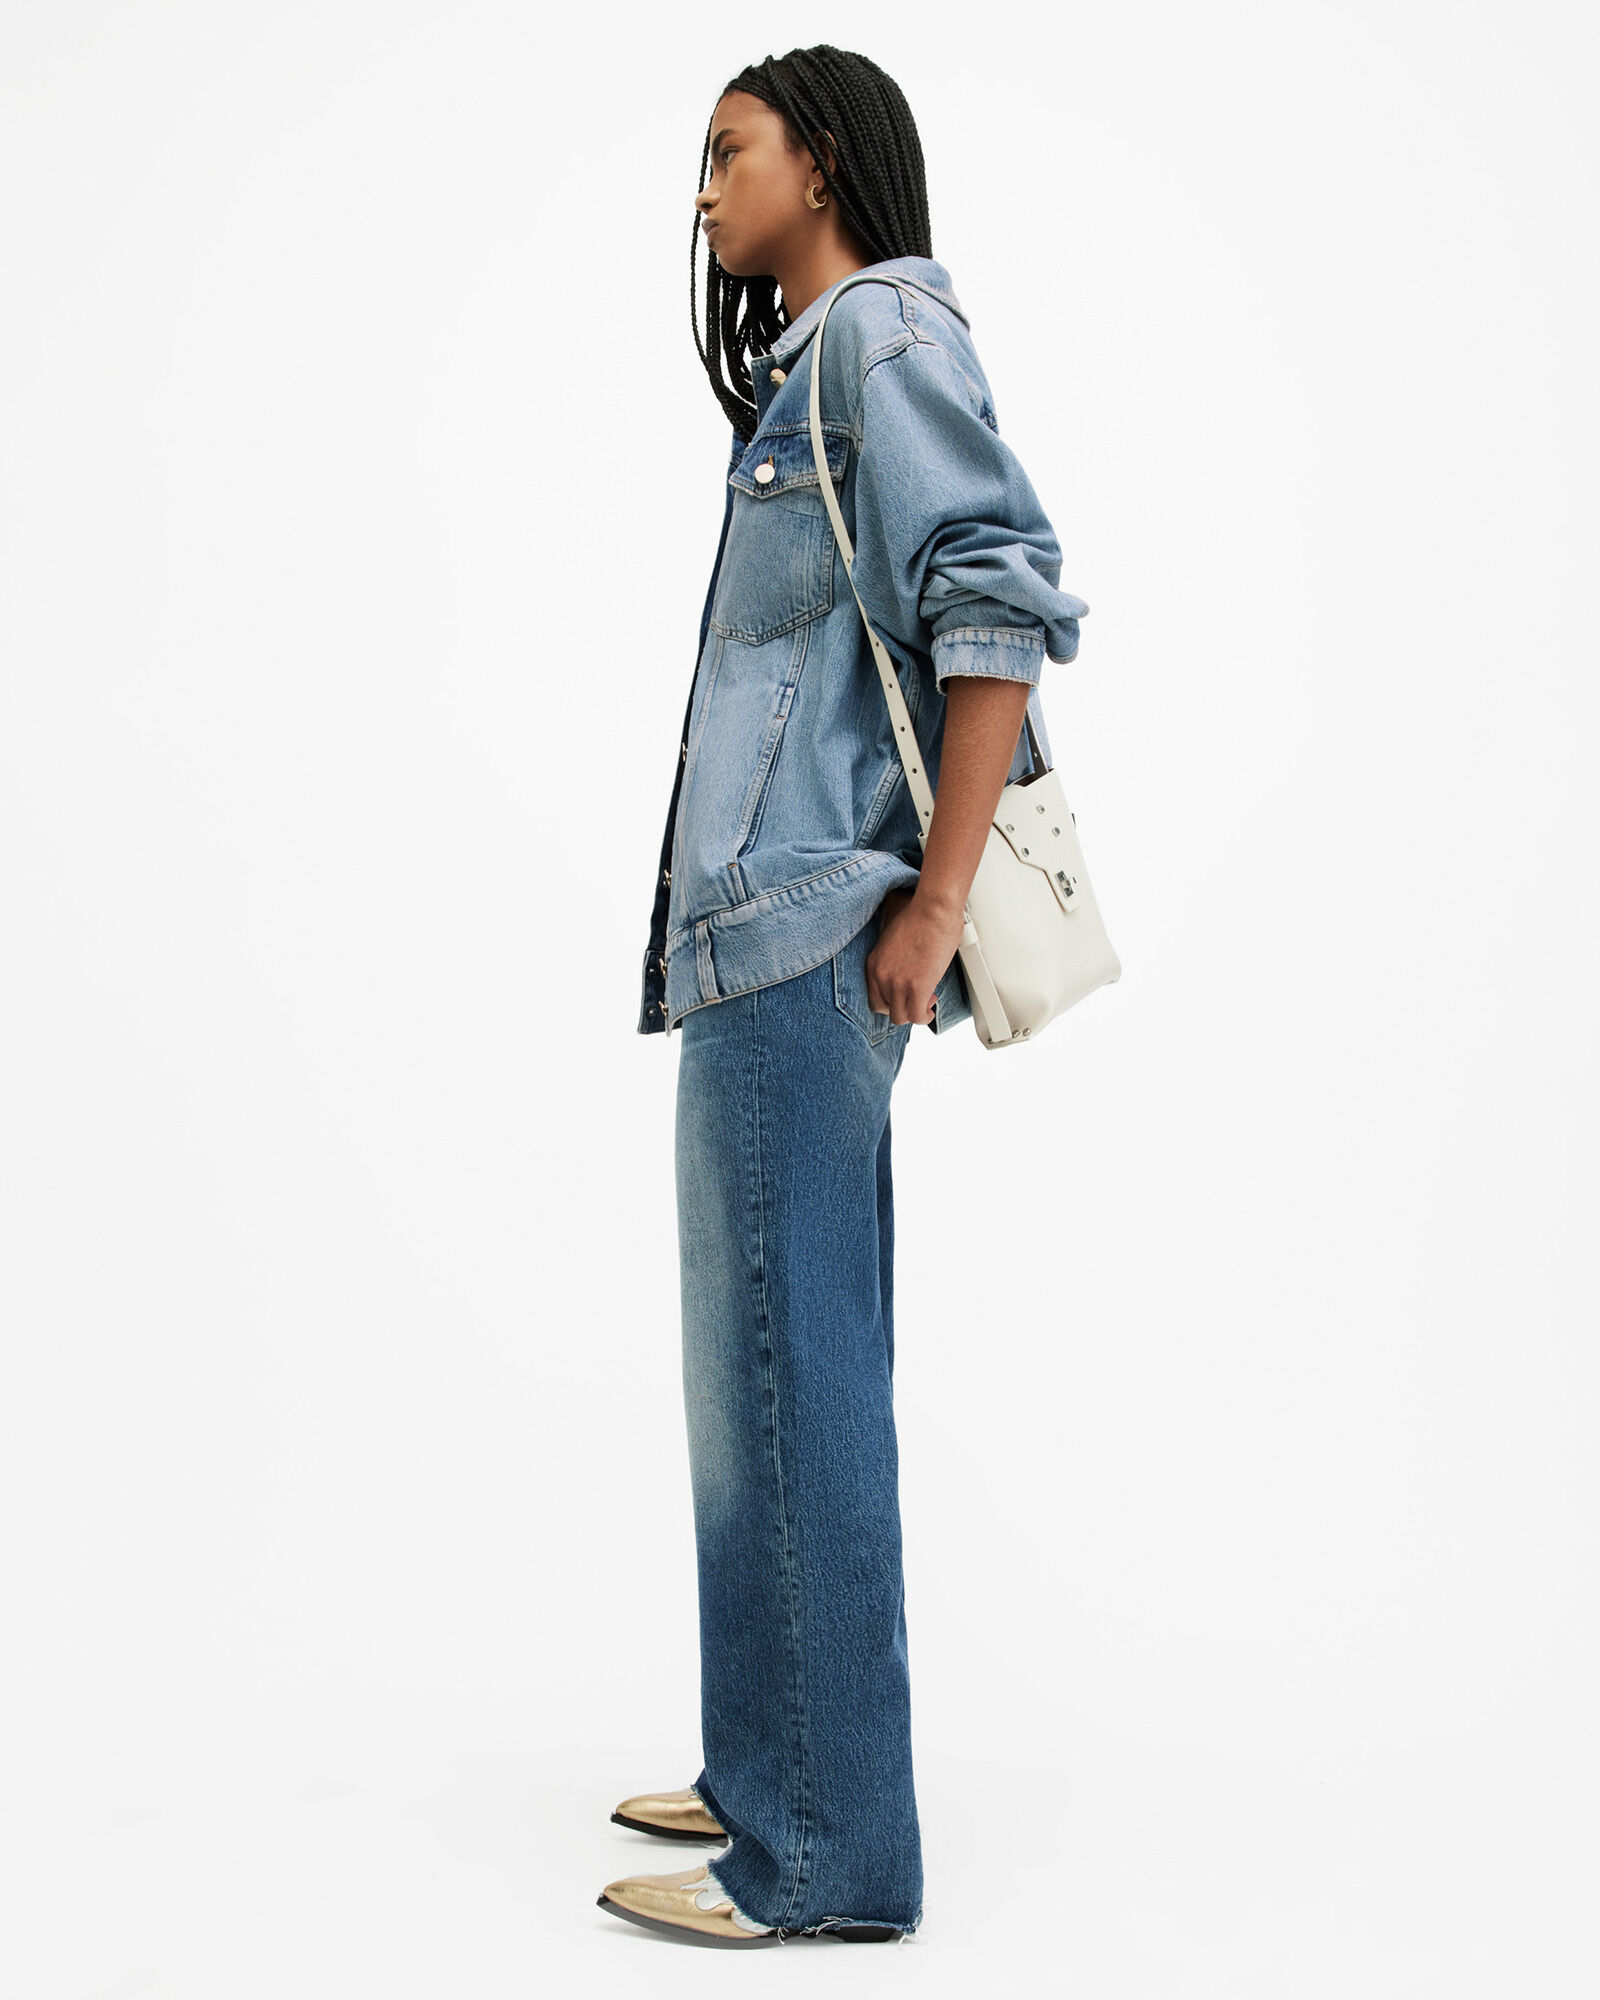 All-Star Denim Jacket – Ruth and Willow